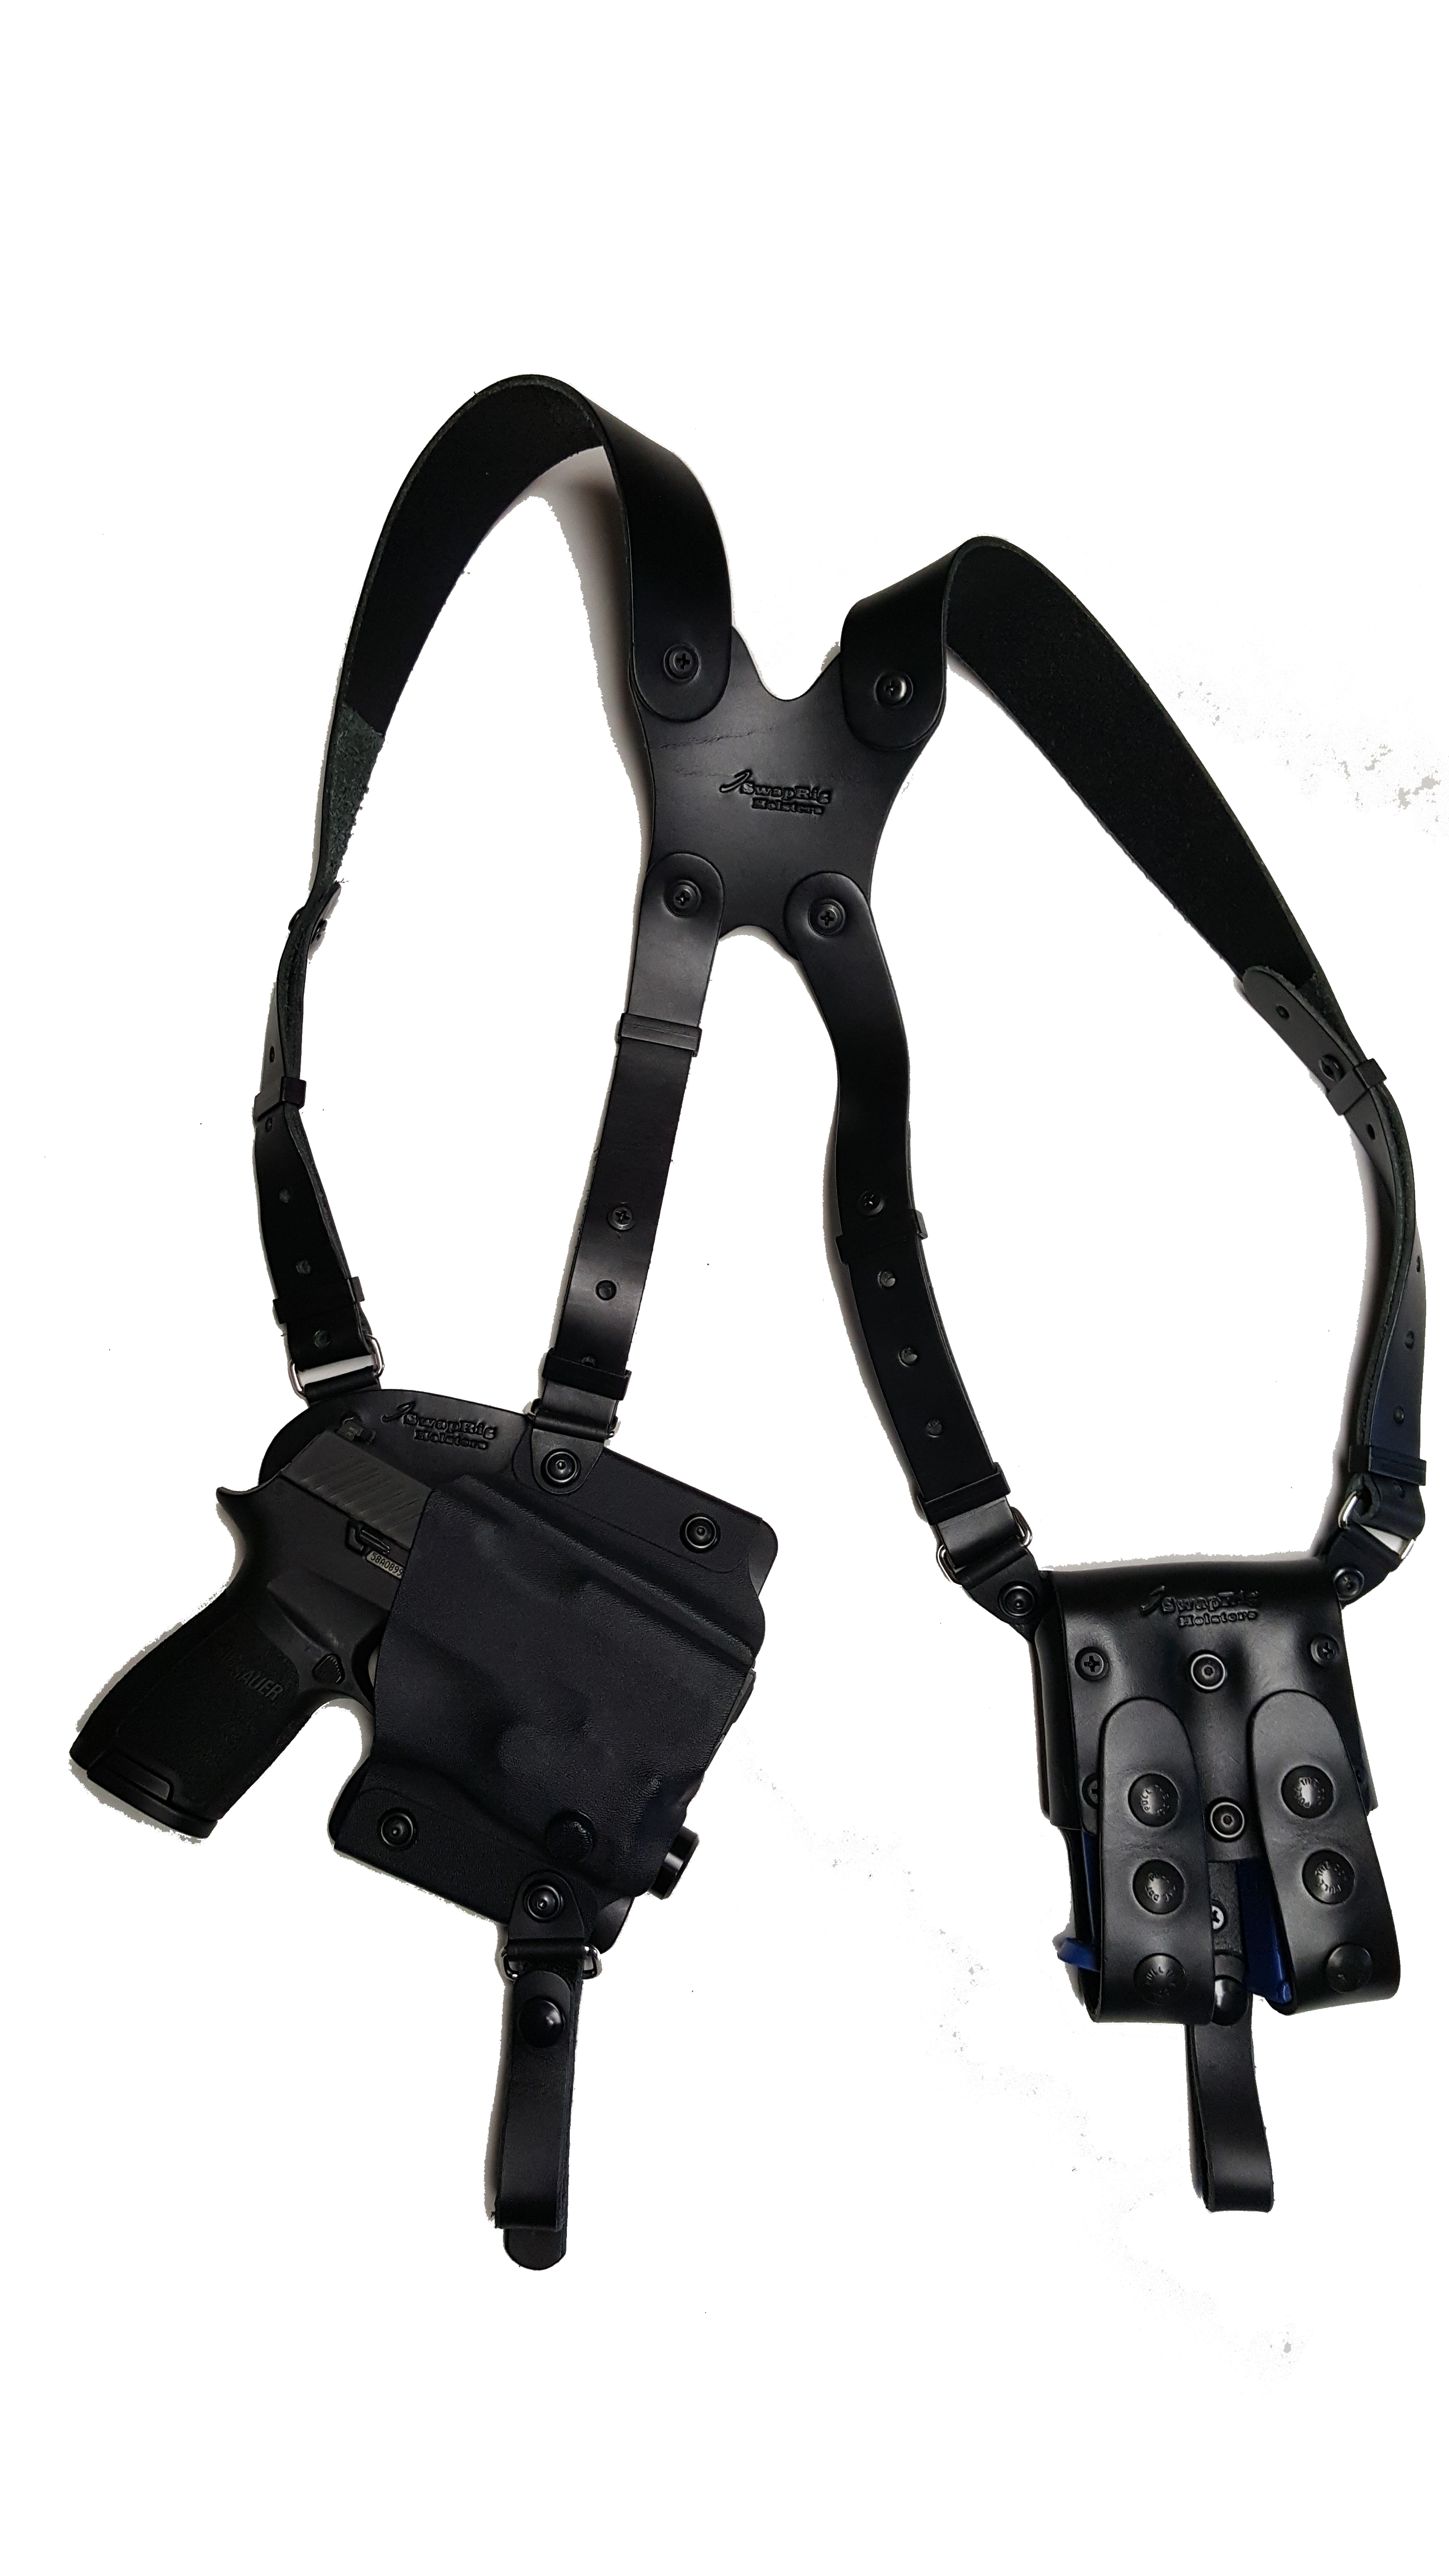 Shoulder holster With Double Magazine Pouch For Glock 20,21